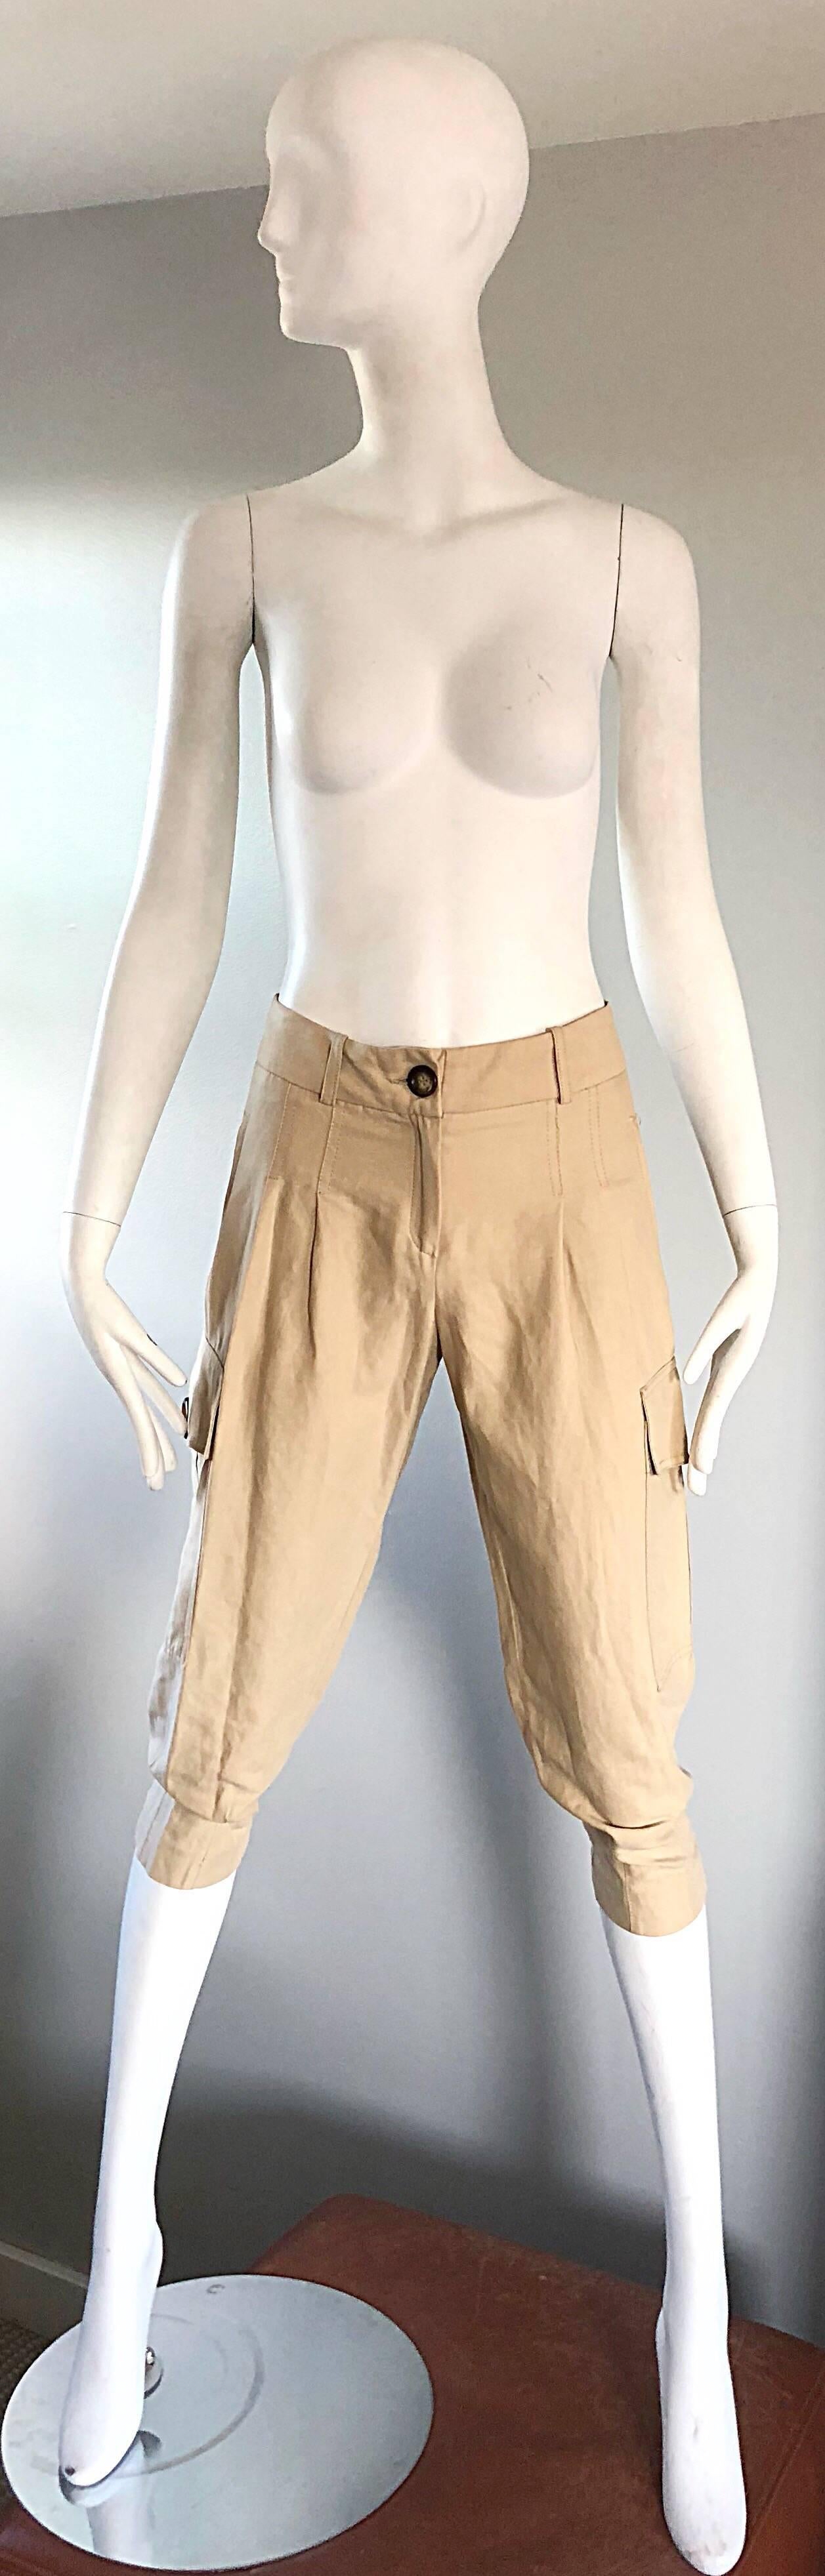 Chic vintage 90s MICHAEL KORS COLLECTION khaki cargo jodhpur safari style cropped capri pants / bermuda shorts! Fashionable single pleat detail on the front. Slight tapered leg give these just the right amount of style! Cargo pockets on each side of